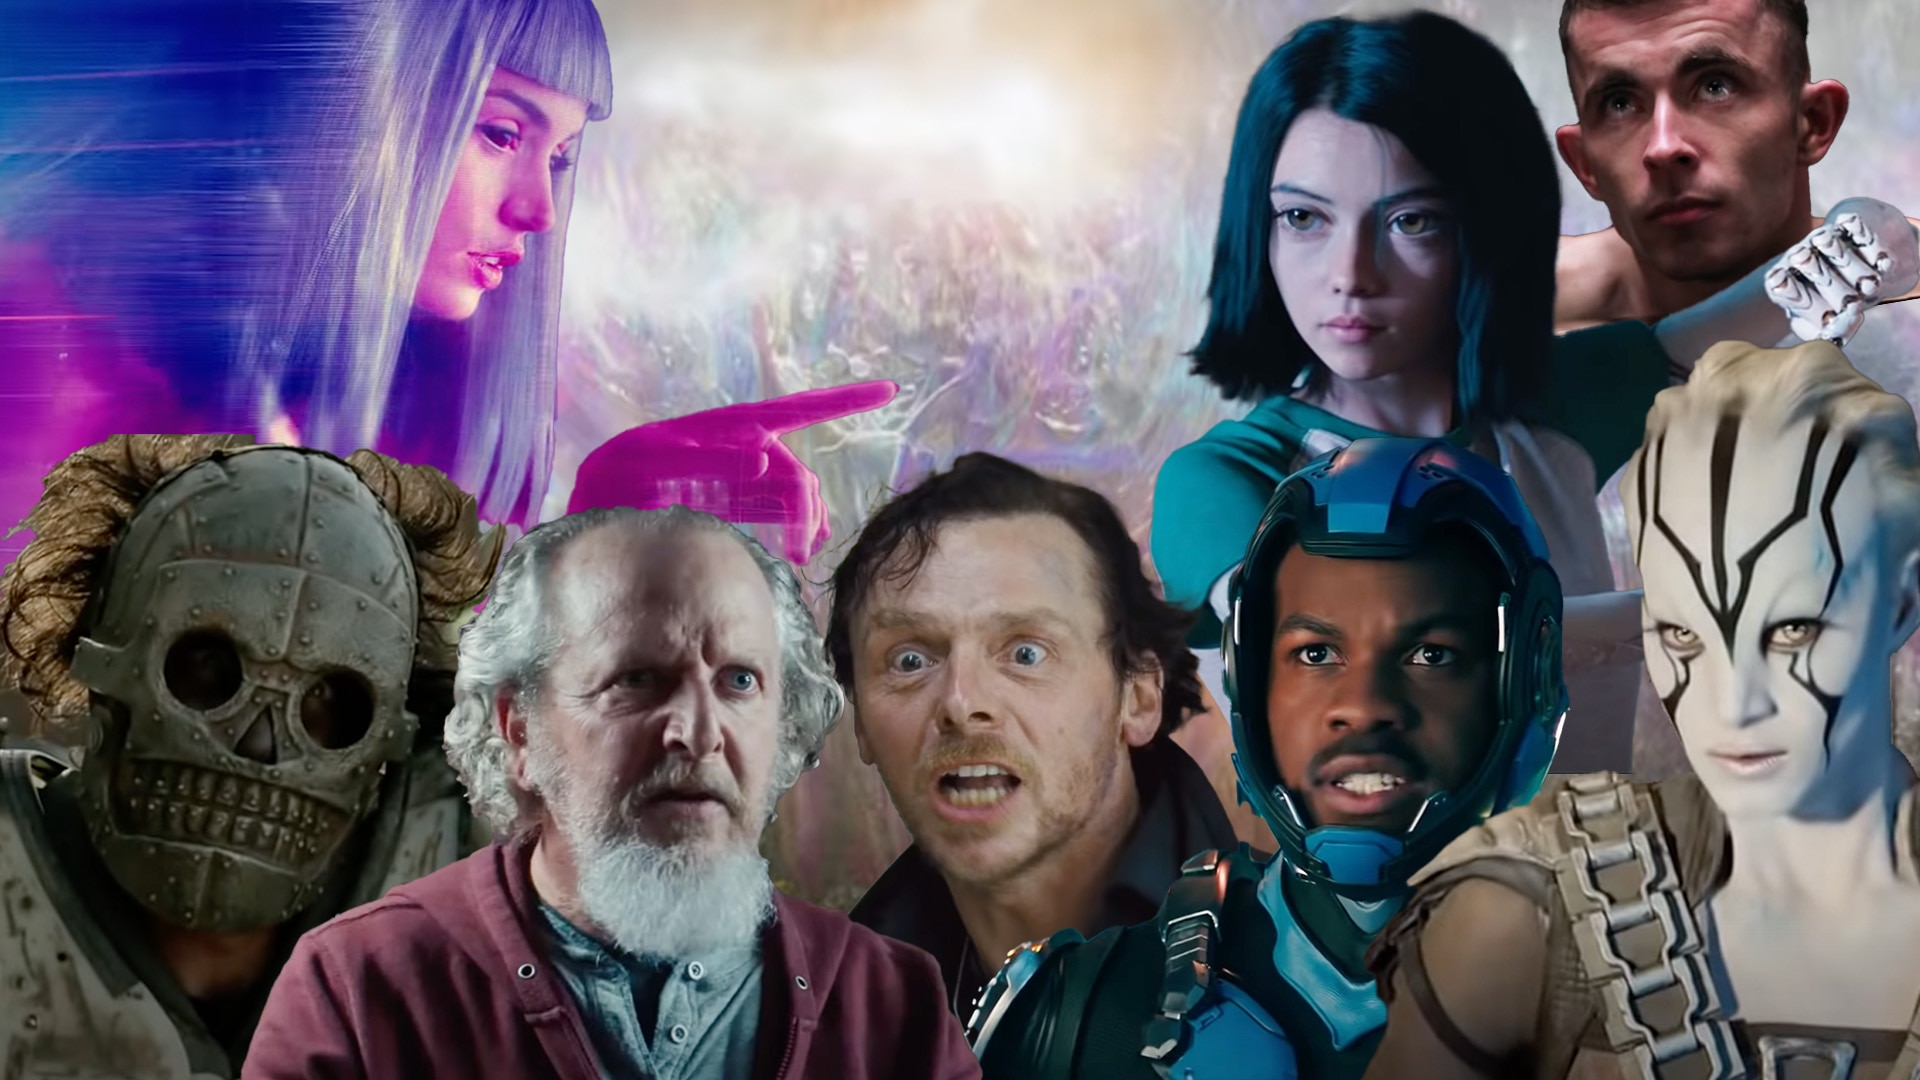 Top 10 sci-fi and fantasy movies of all time 